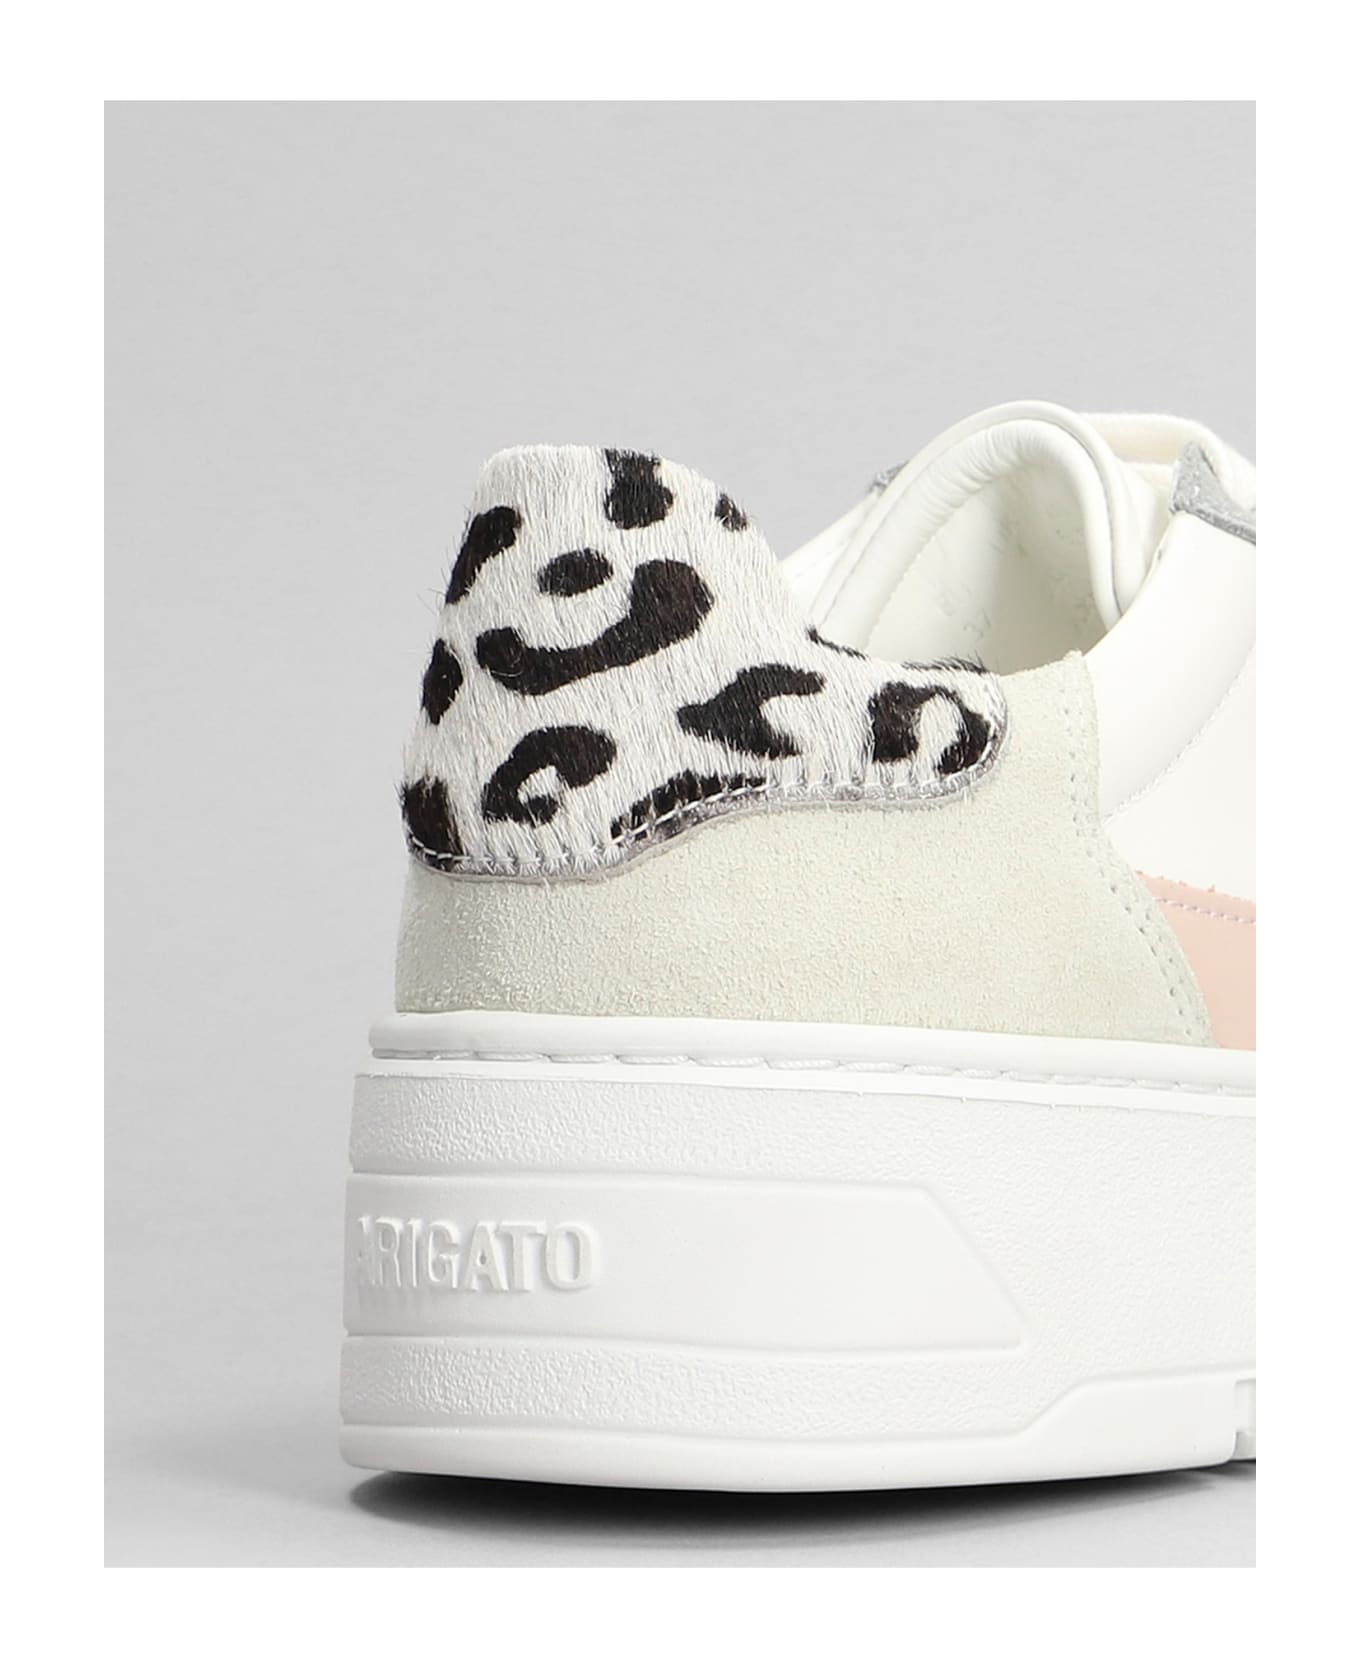 Axel Arigato Orbit Sneakers In White Suede And Leather - white ウェッジシューズ